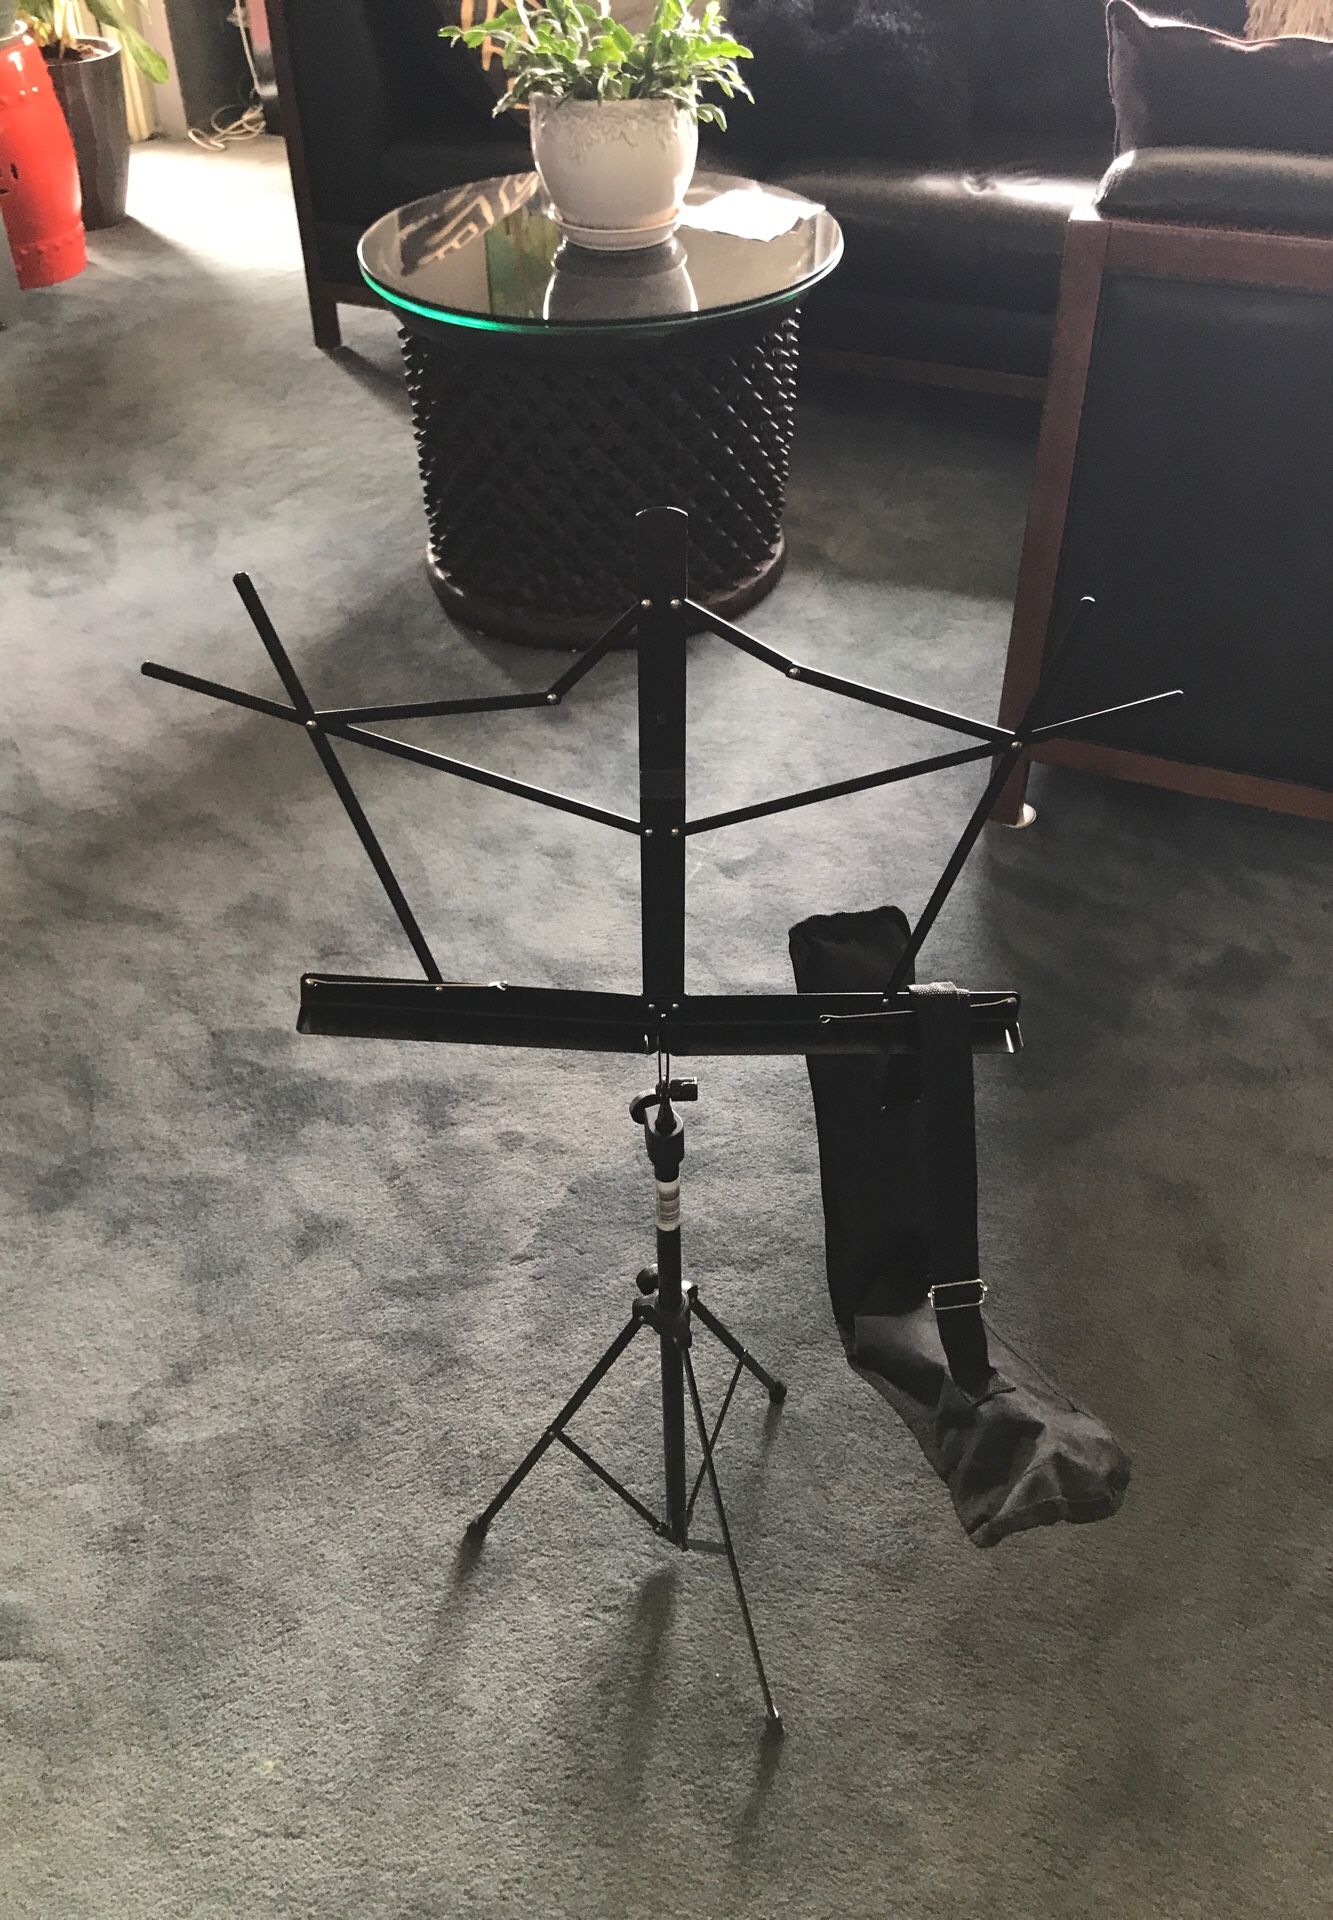 Portable-Collapsible music stand with carrying case. NEW